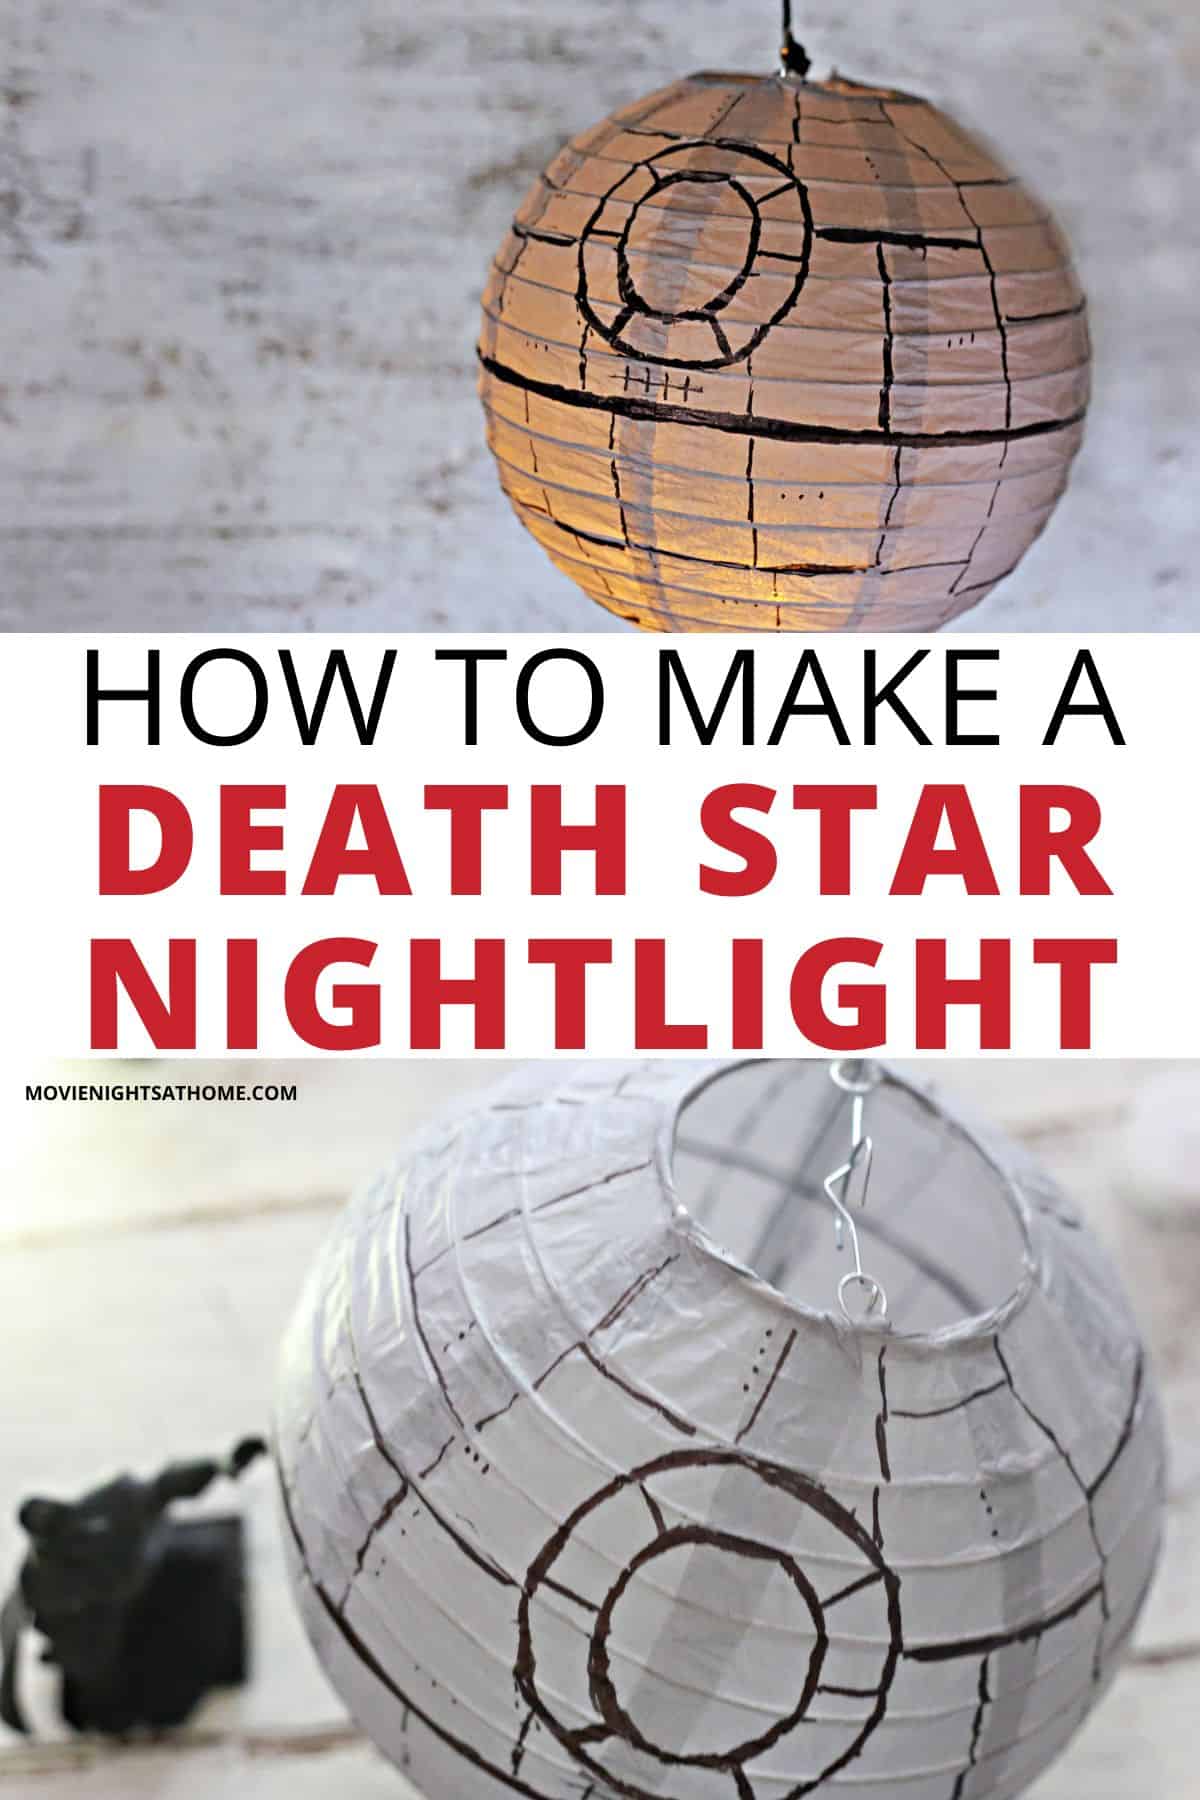 collage of the diy star wars craft lantern - text overlay says how to make a death star nightlight